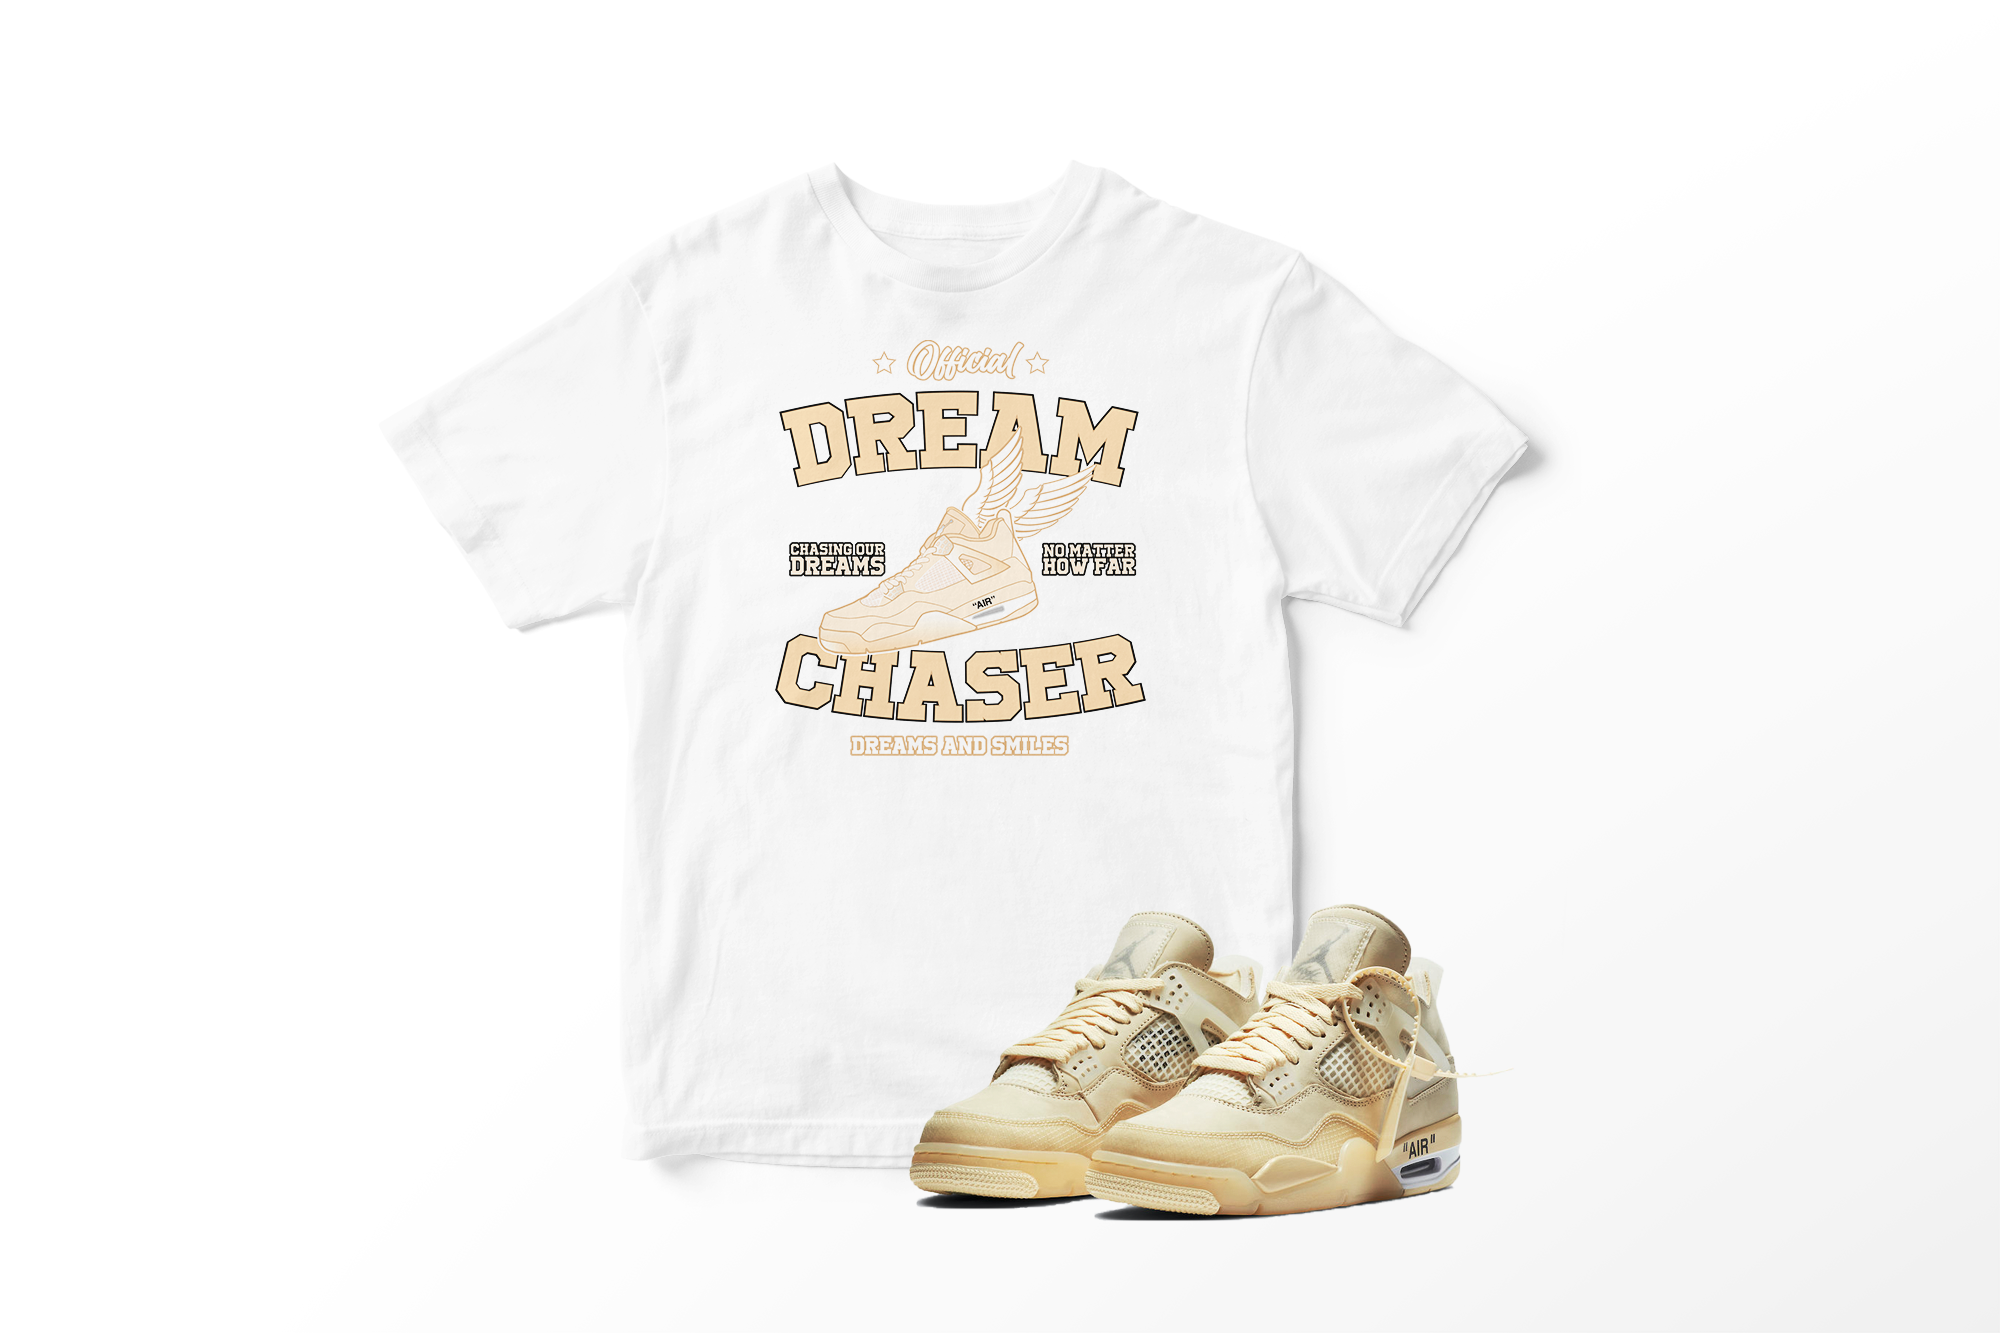 'Official Dream Chaser' in Sail CW Short Sleeve Tee